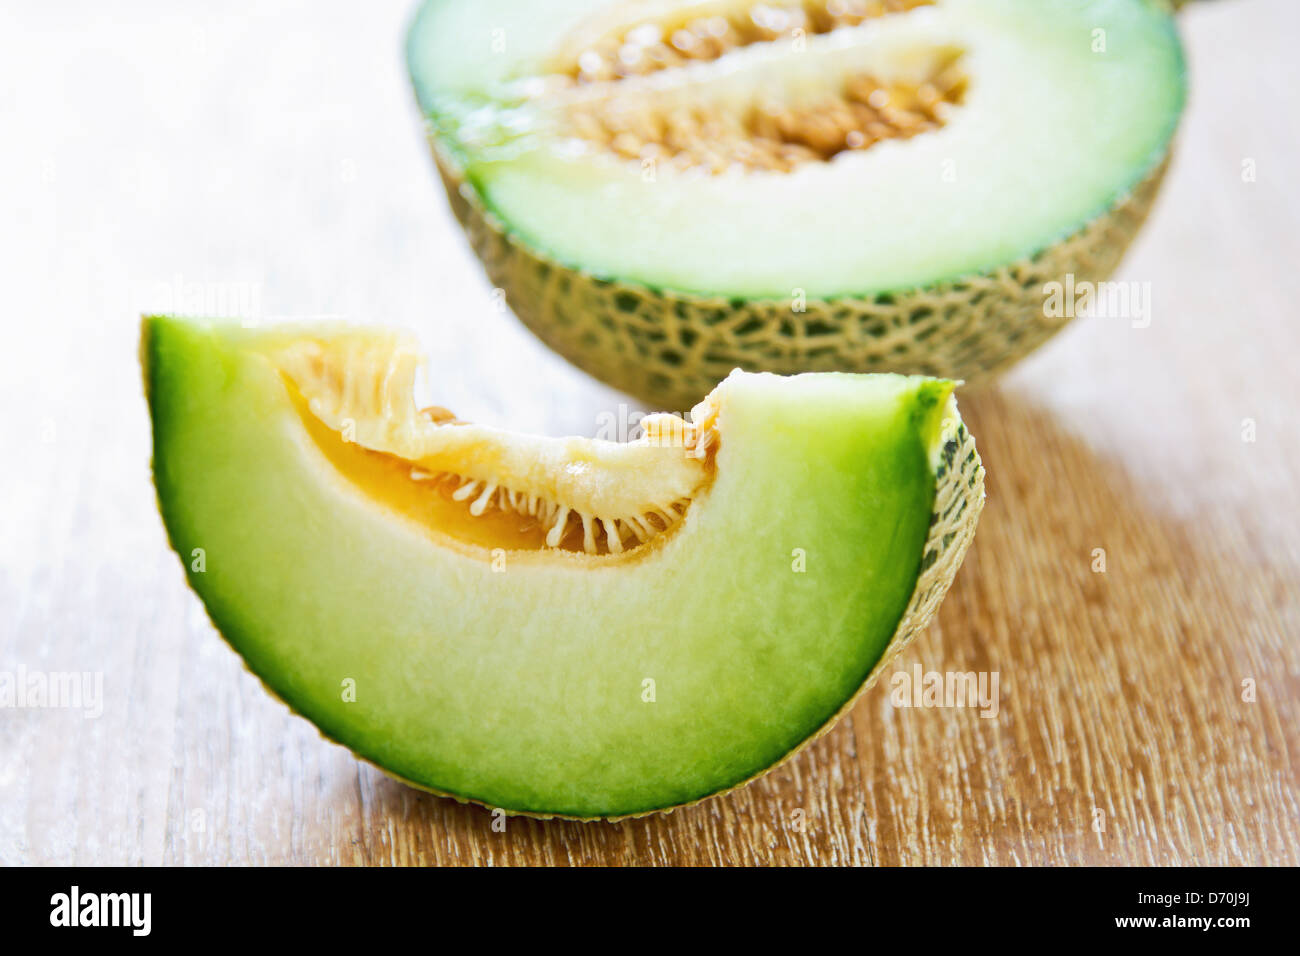 A type of Melon called Honeydew Stock Photo